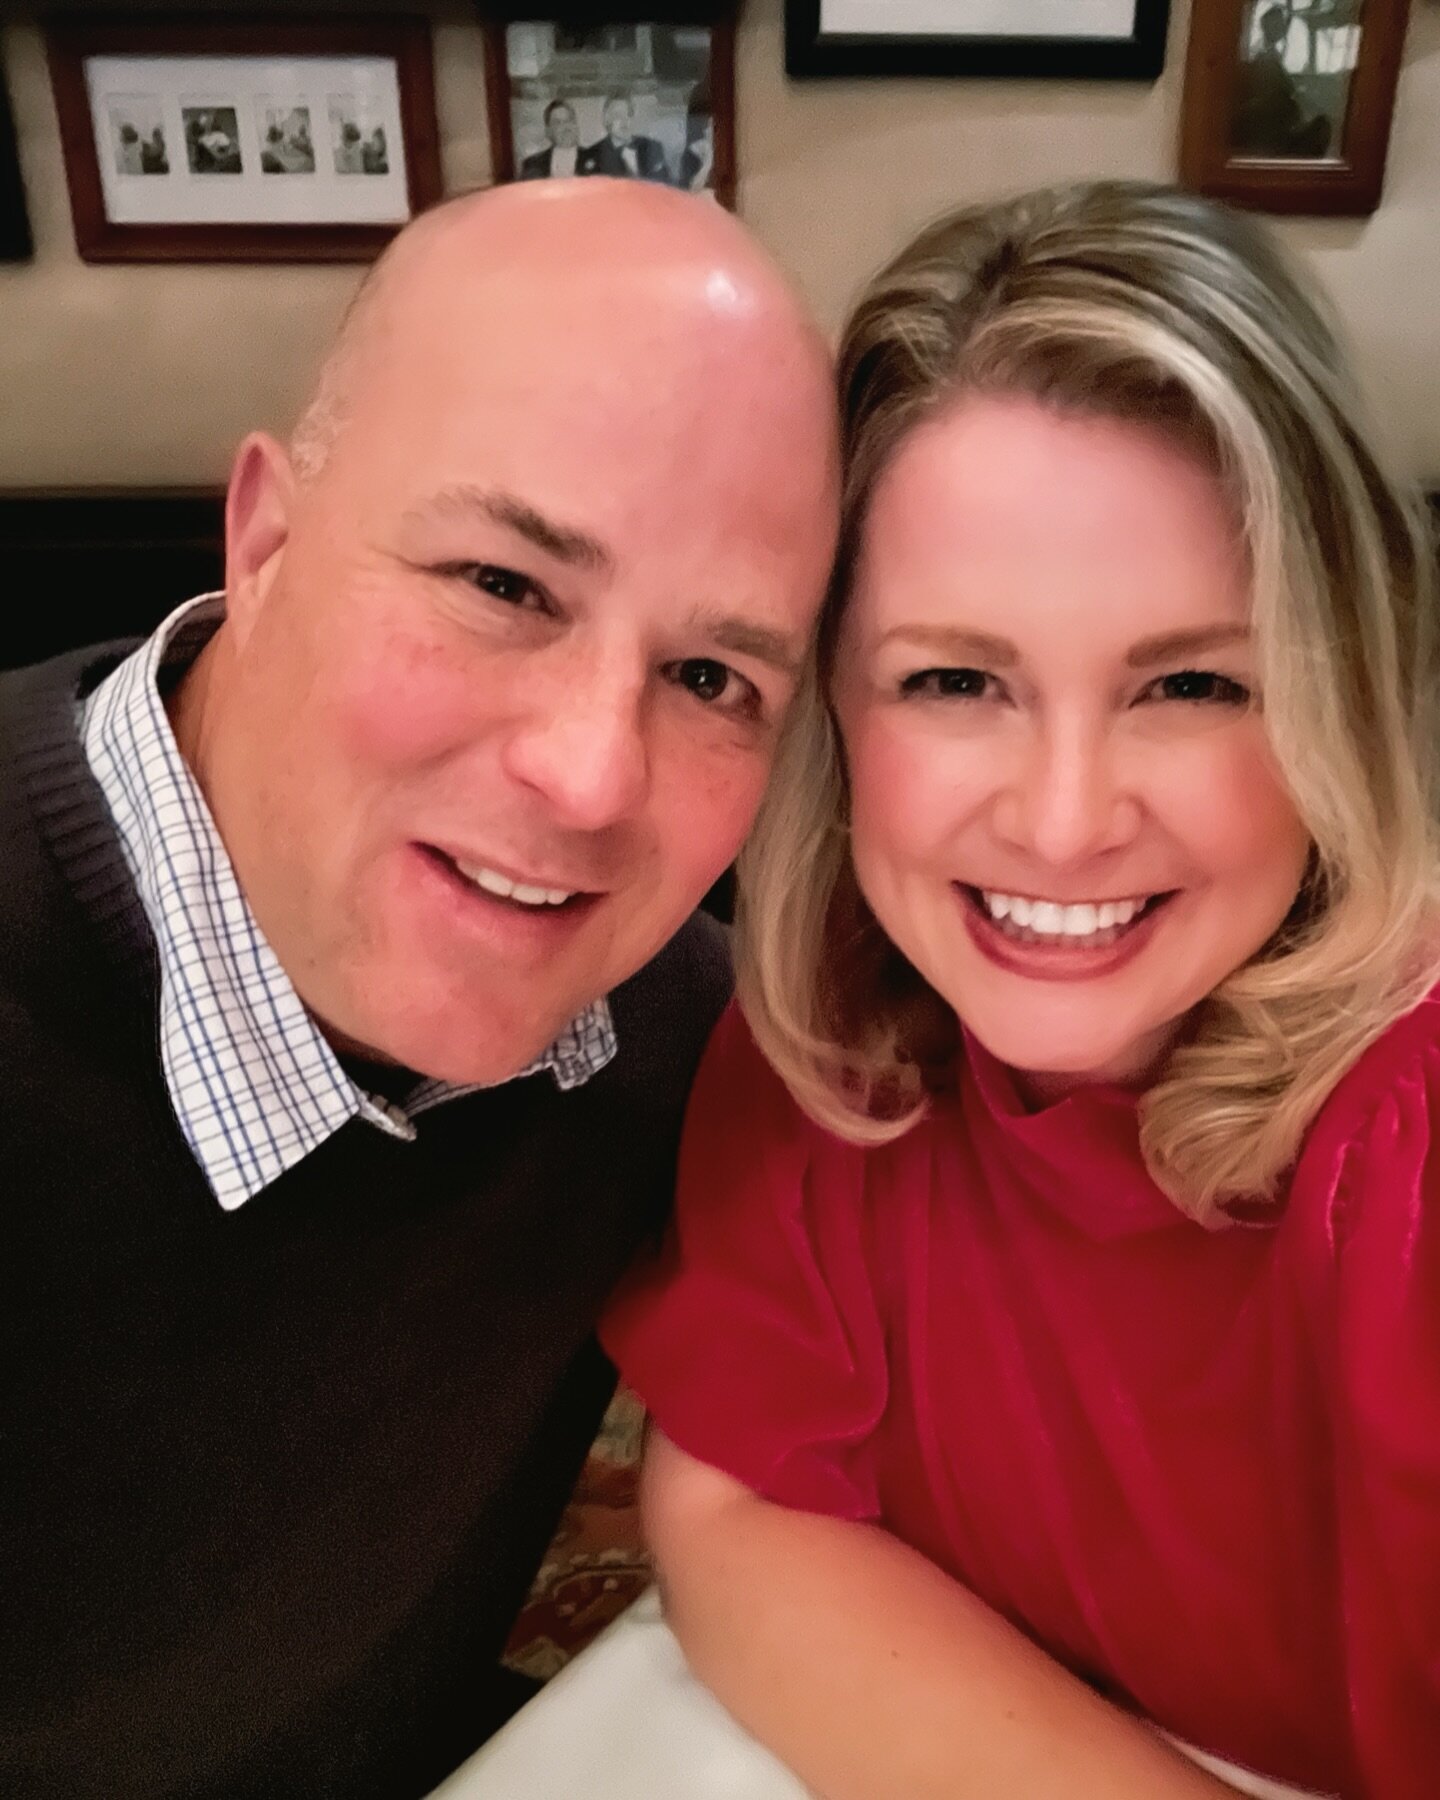 💞Date Night💞

Date your spouse! It&rsquo;s a great investment in your relationship that pays dividends for your kids.

What creative date night ideas do you have?